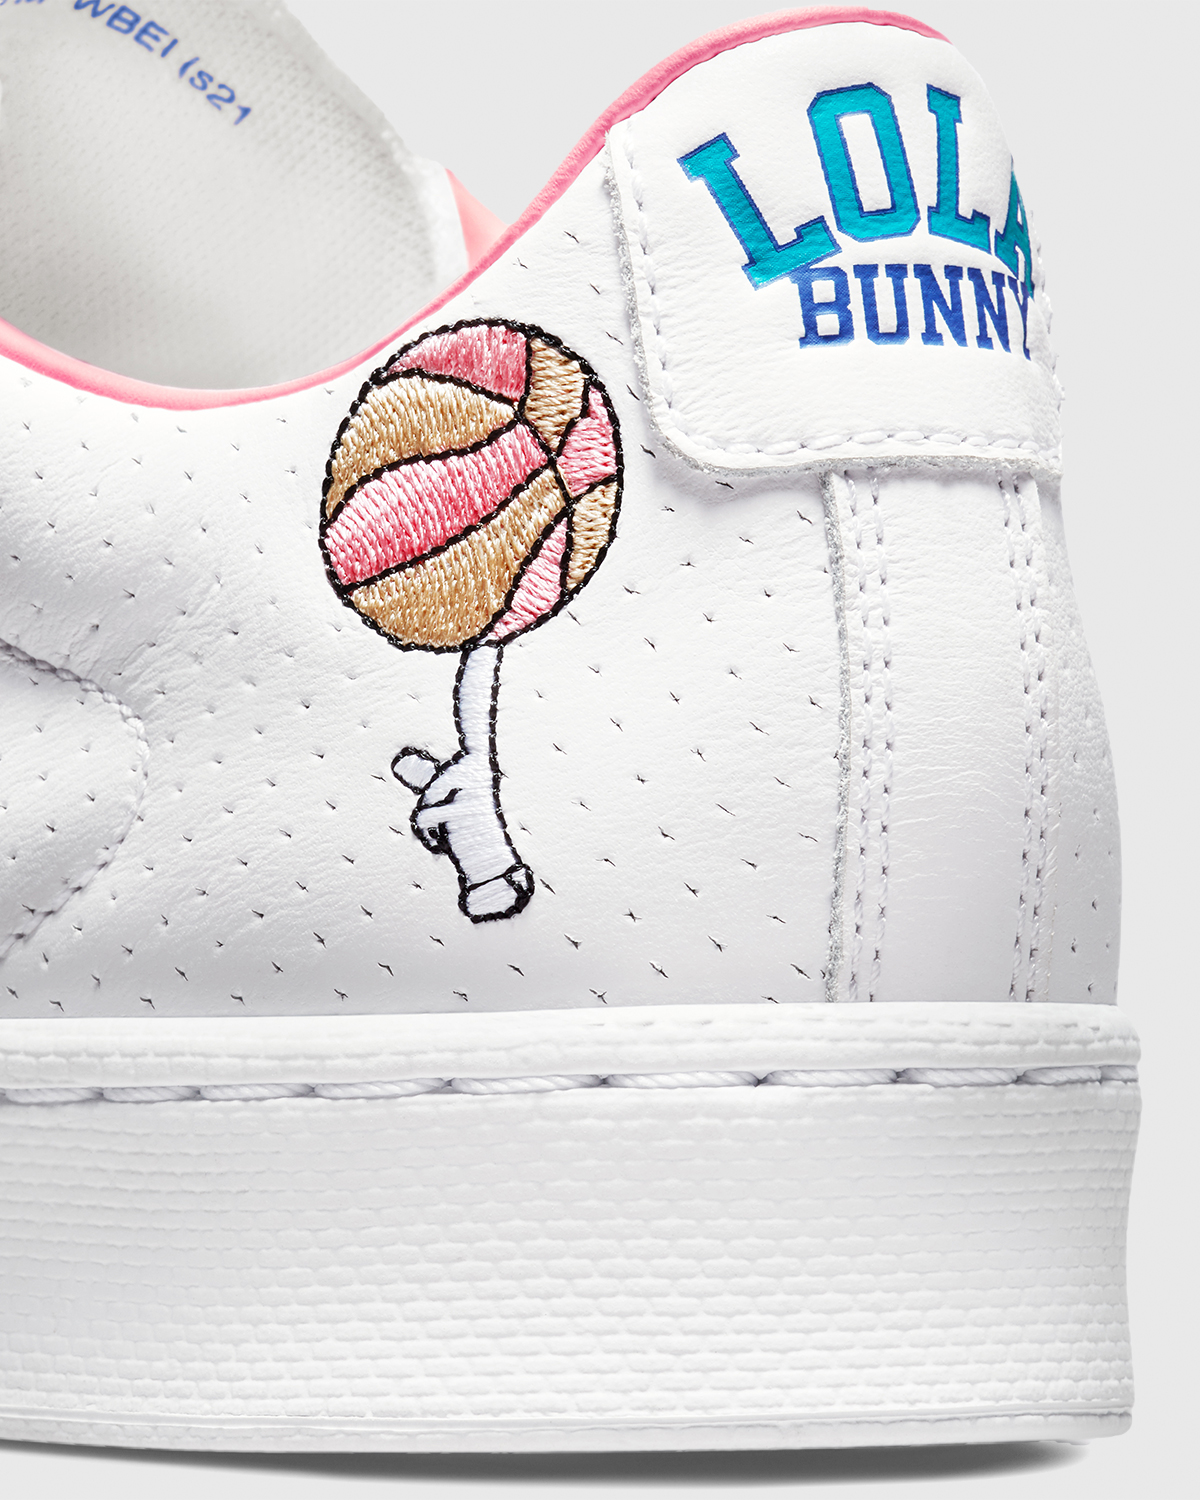 converse-space-jam-2-pack-release-date-price-lola-bunny-07